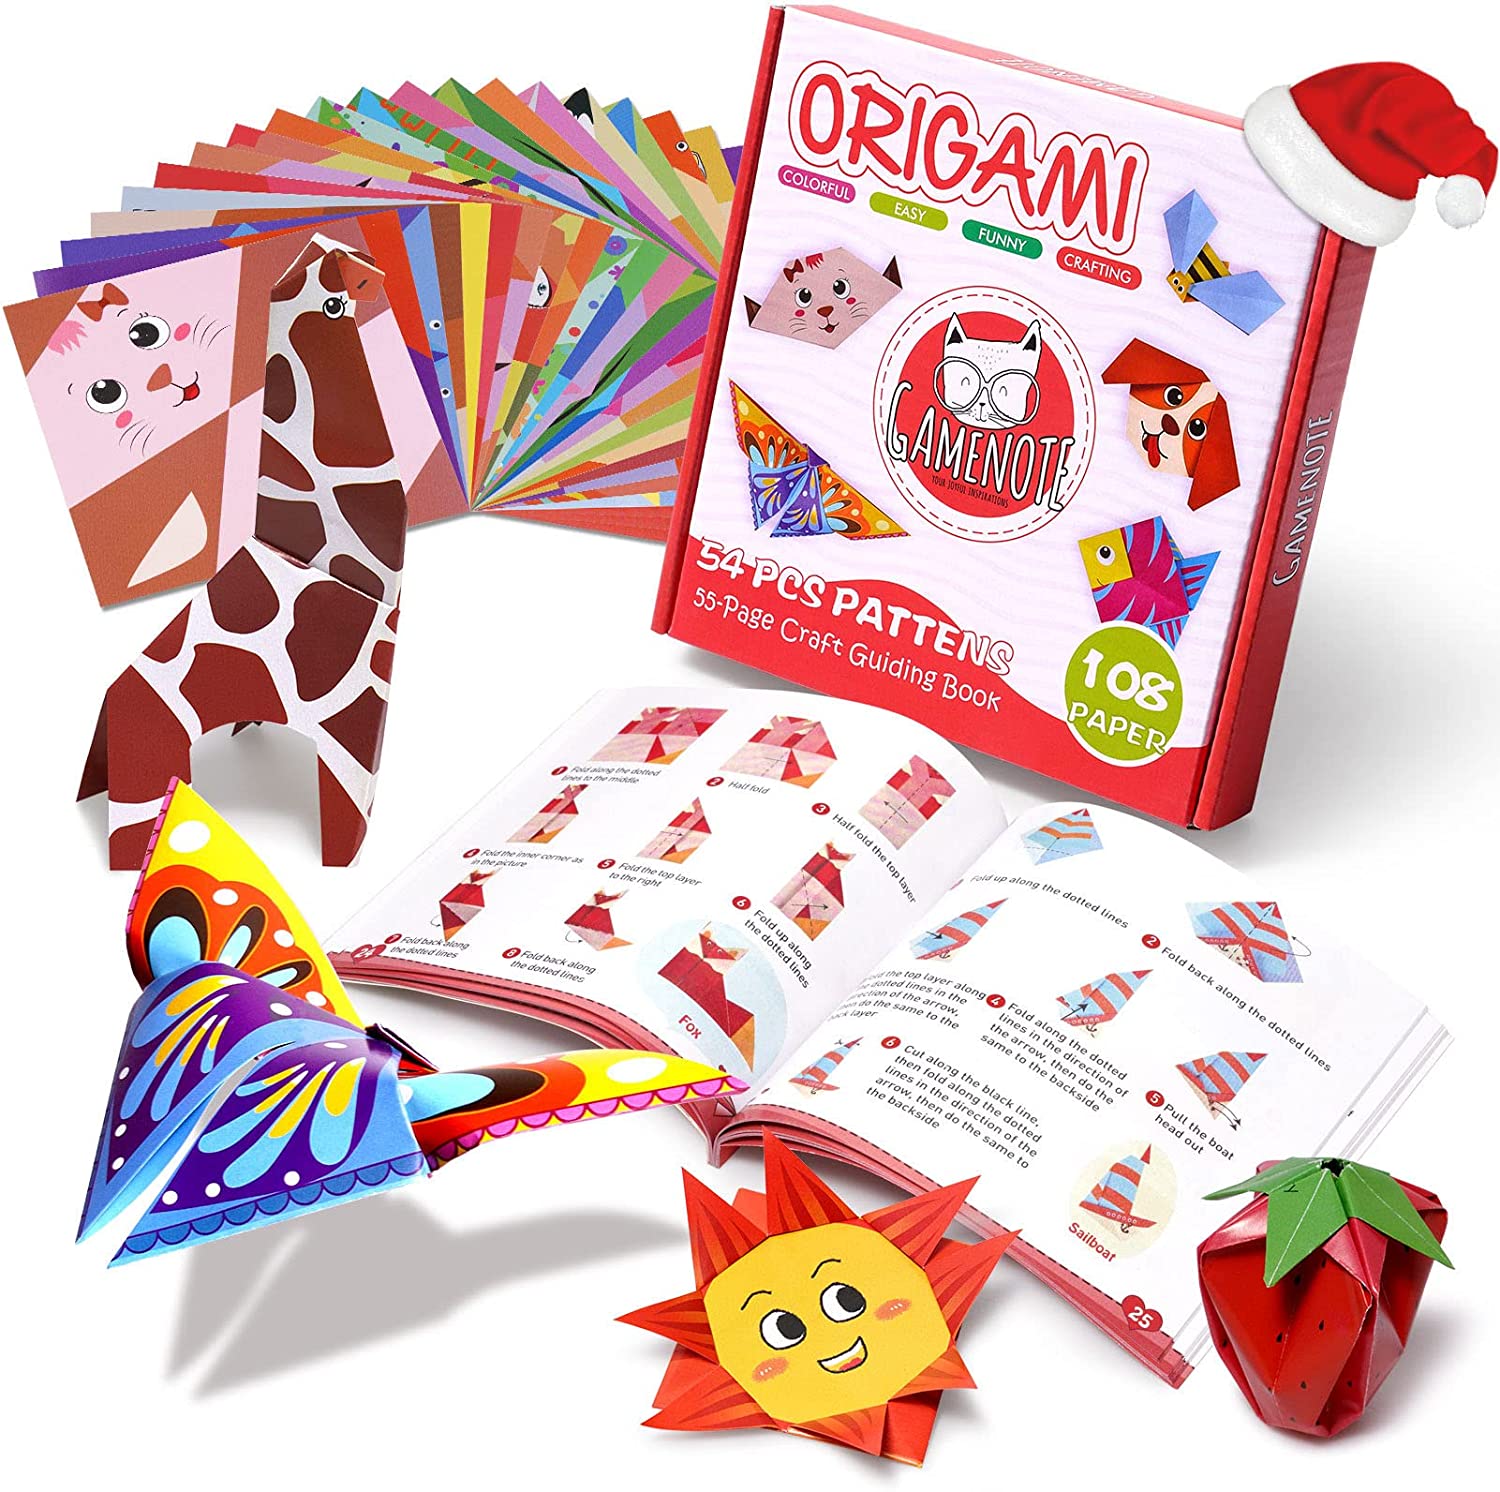 Gamenote Colorful Kids Origami Kit 118 Double Sided Vivid Origami